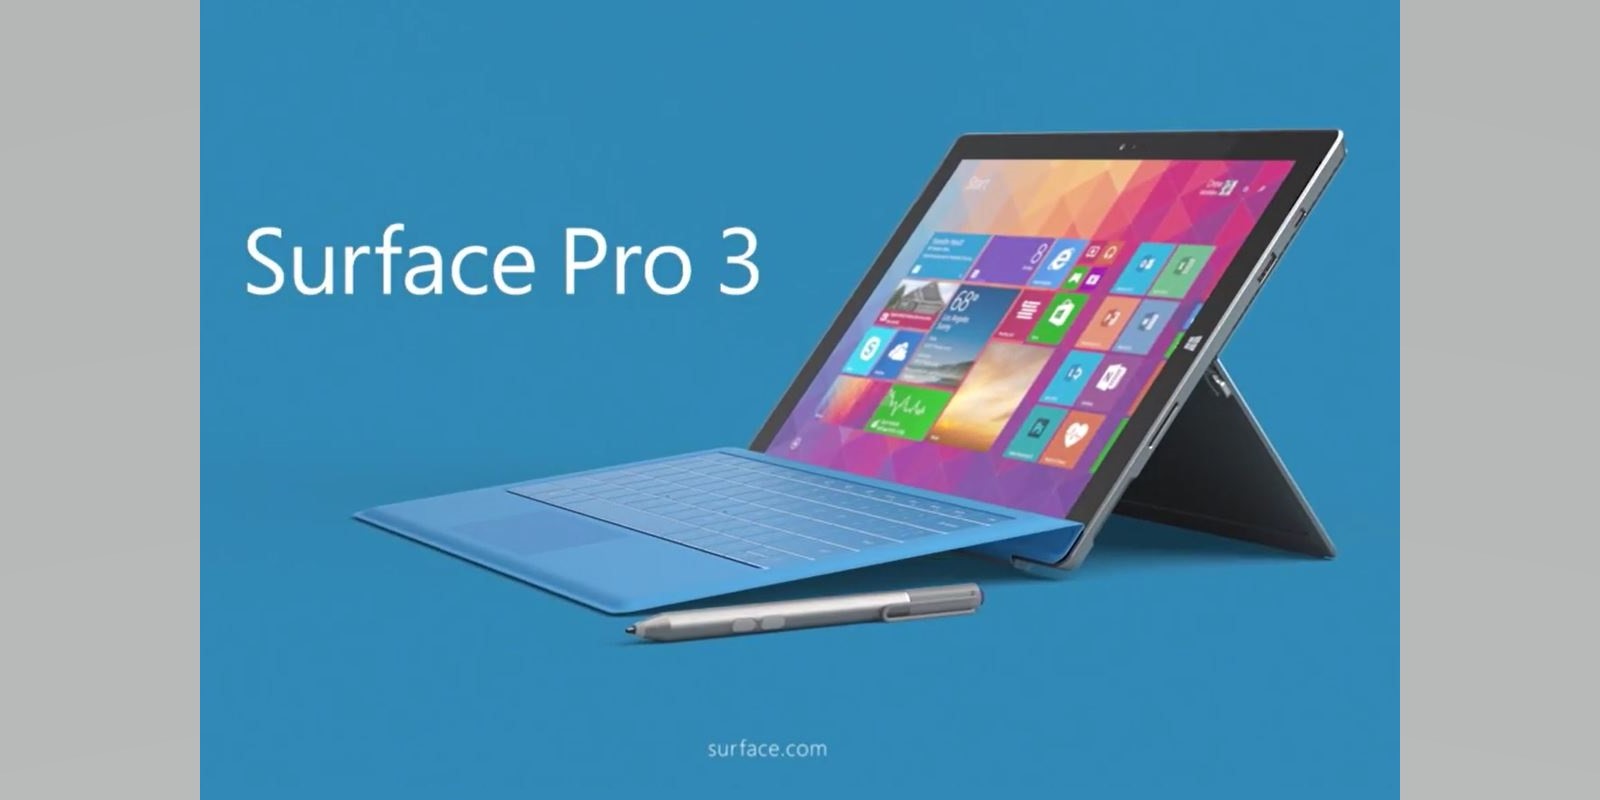 The Surface Pro 3 has 1 more year of official support